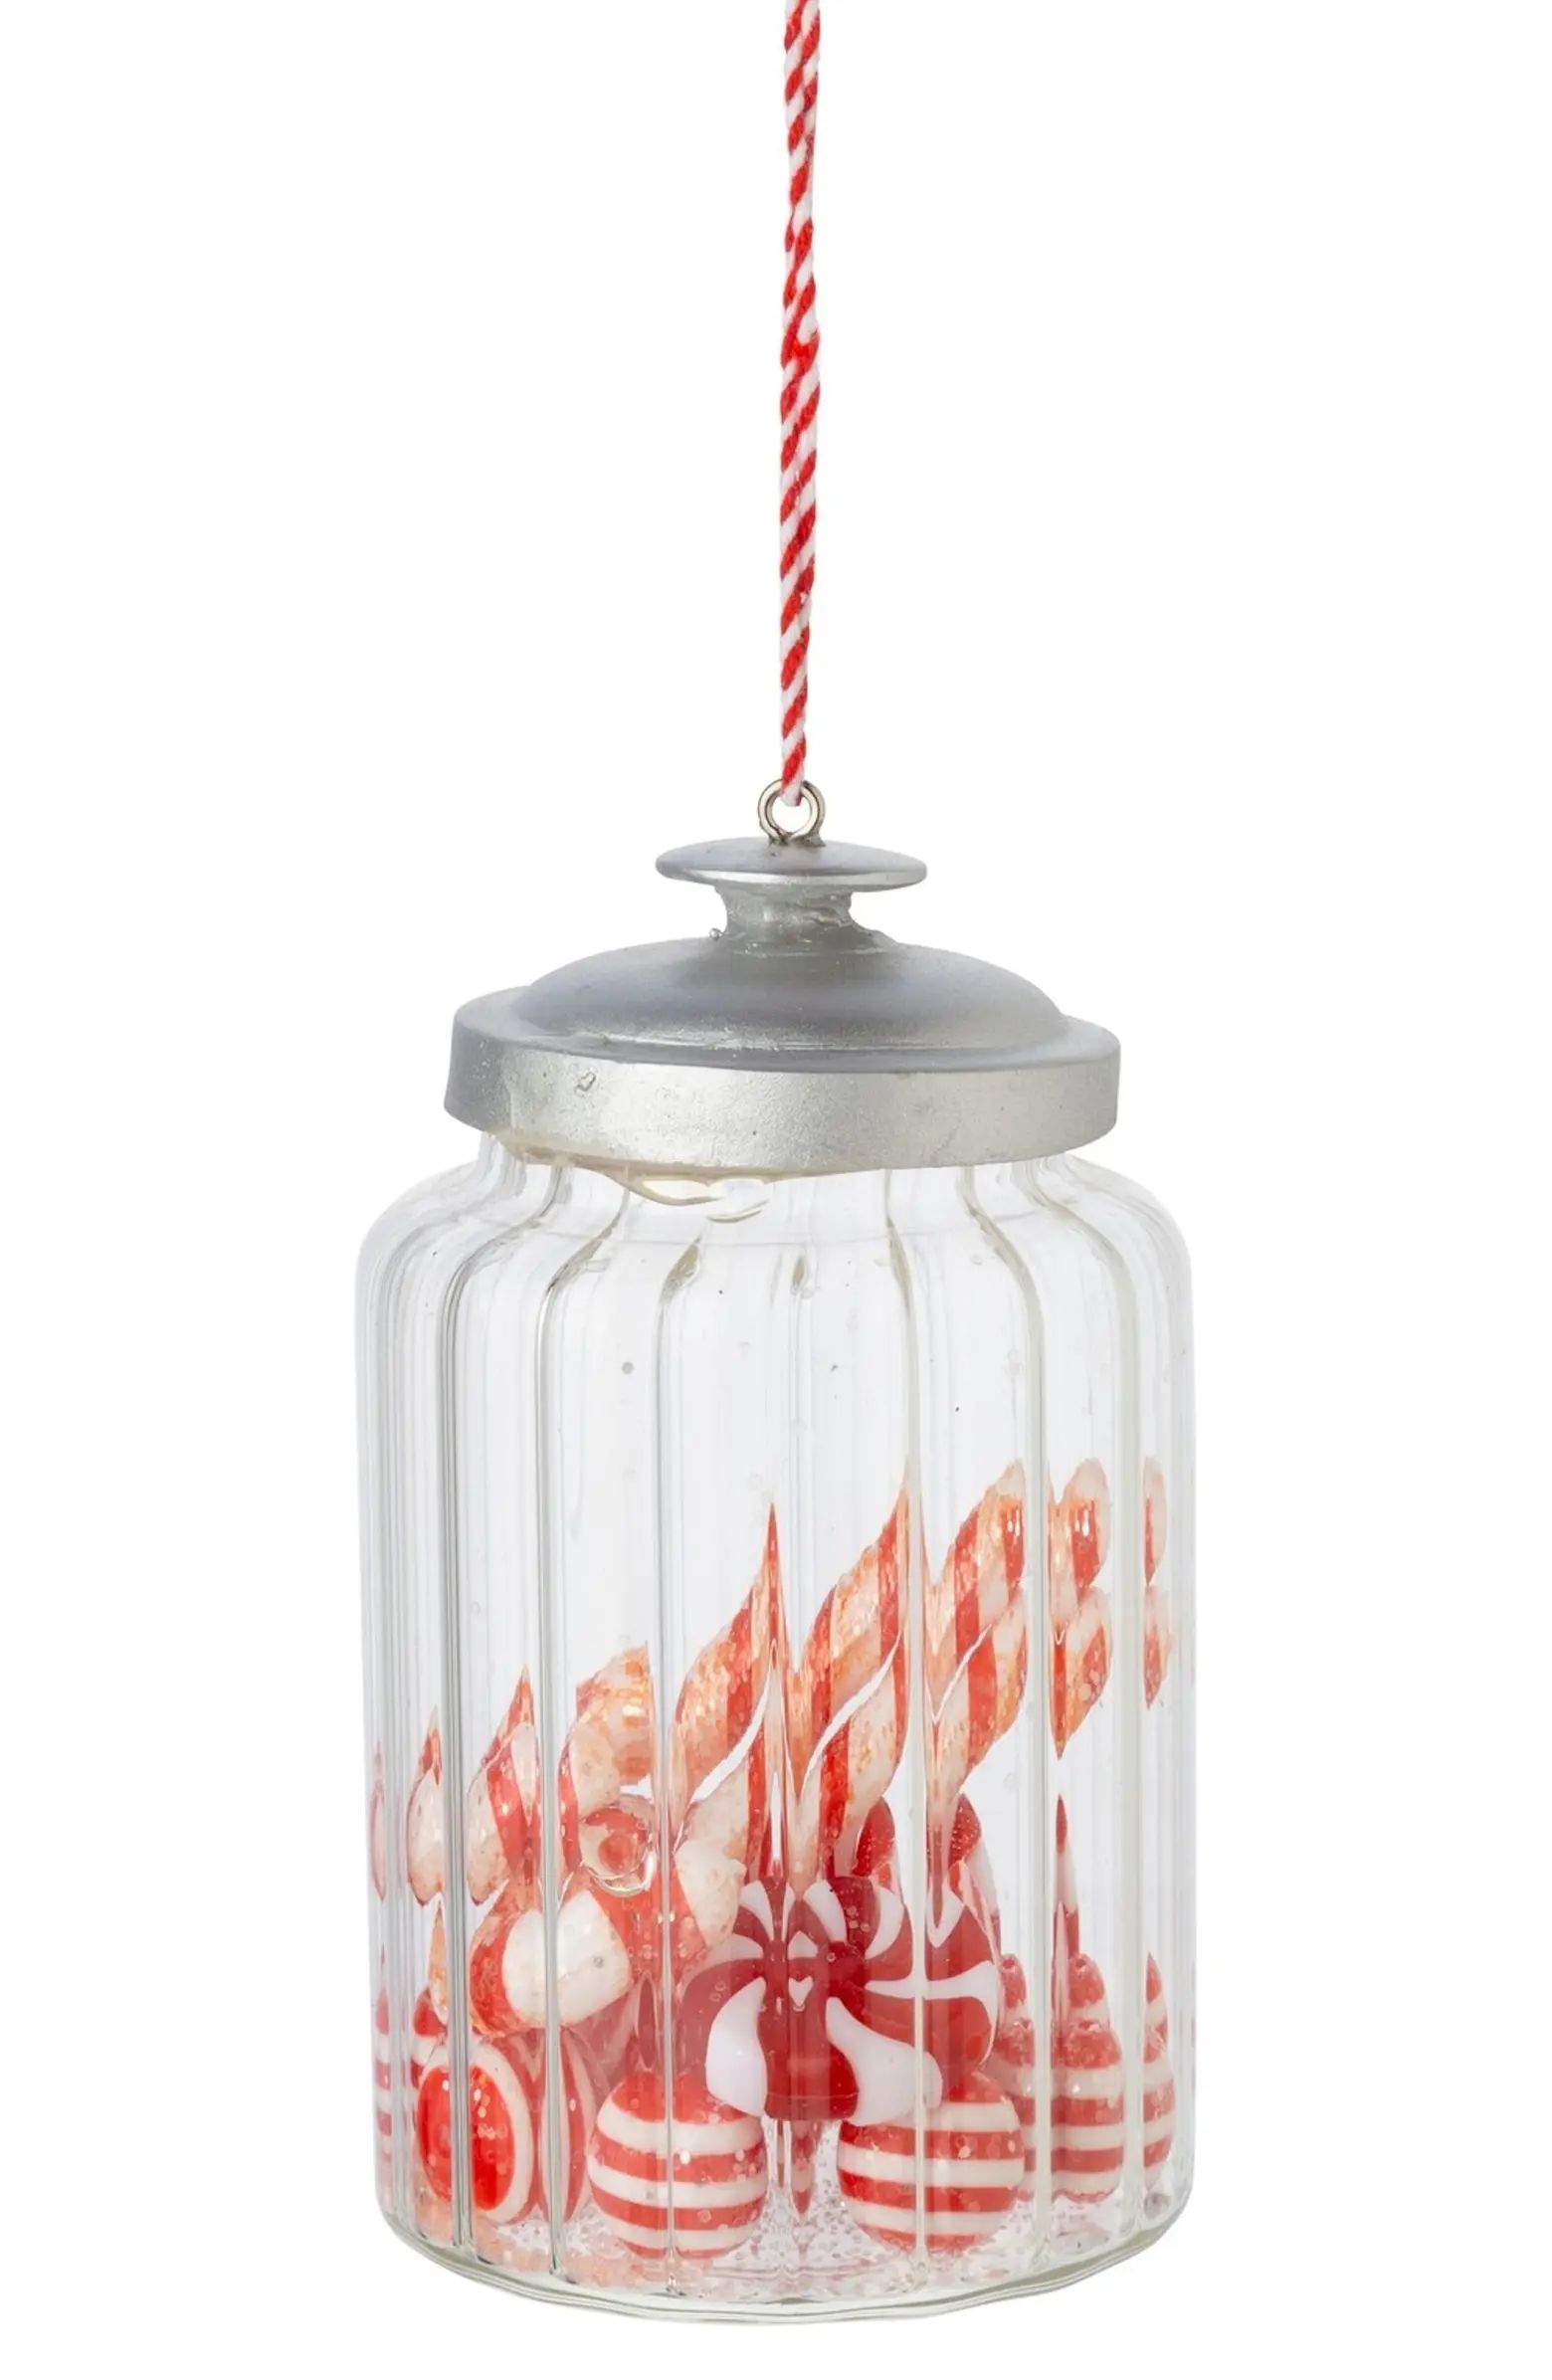 Silver Tree Peppermint Candy Jar Glass Ornament | Nordstrom | Nordstrom